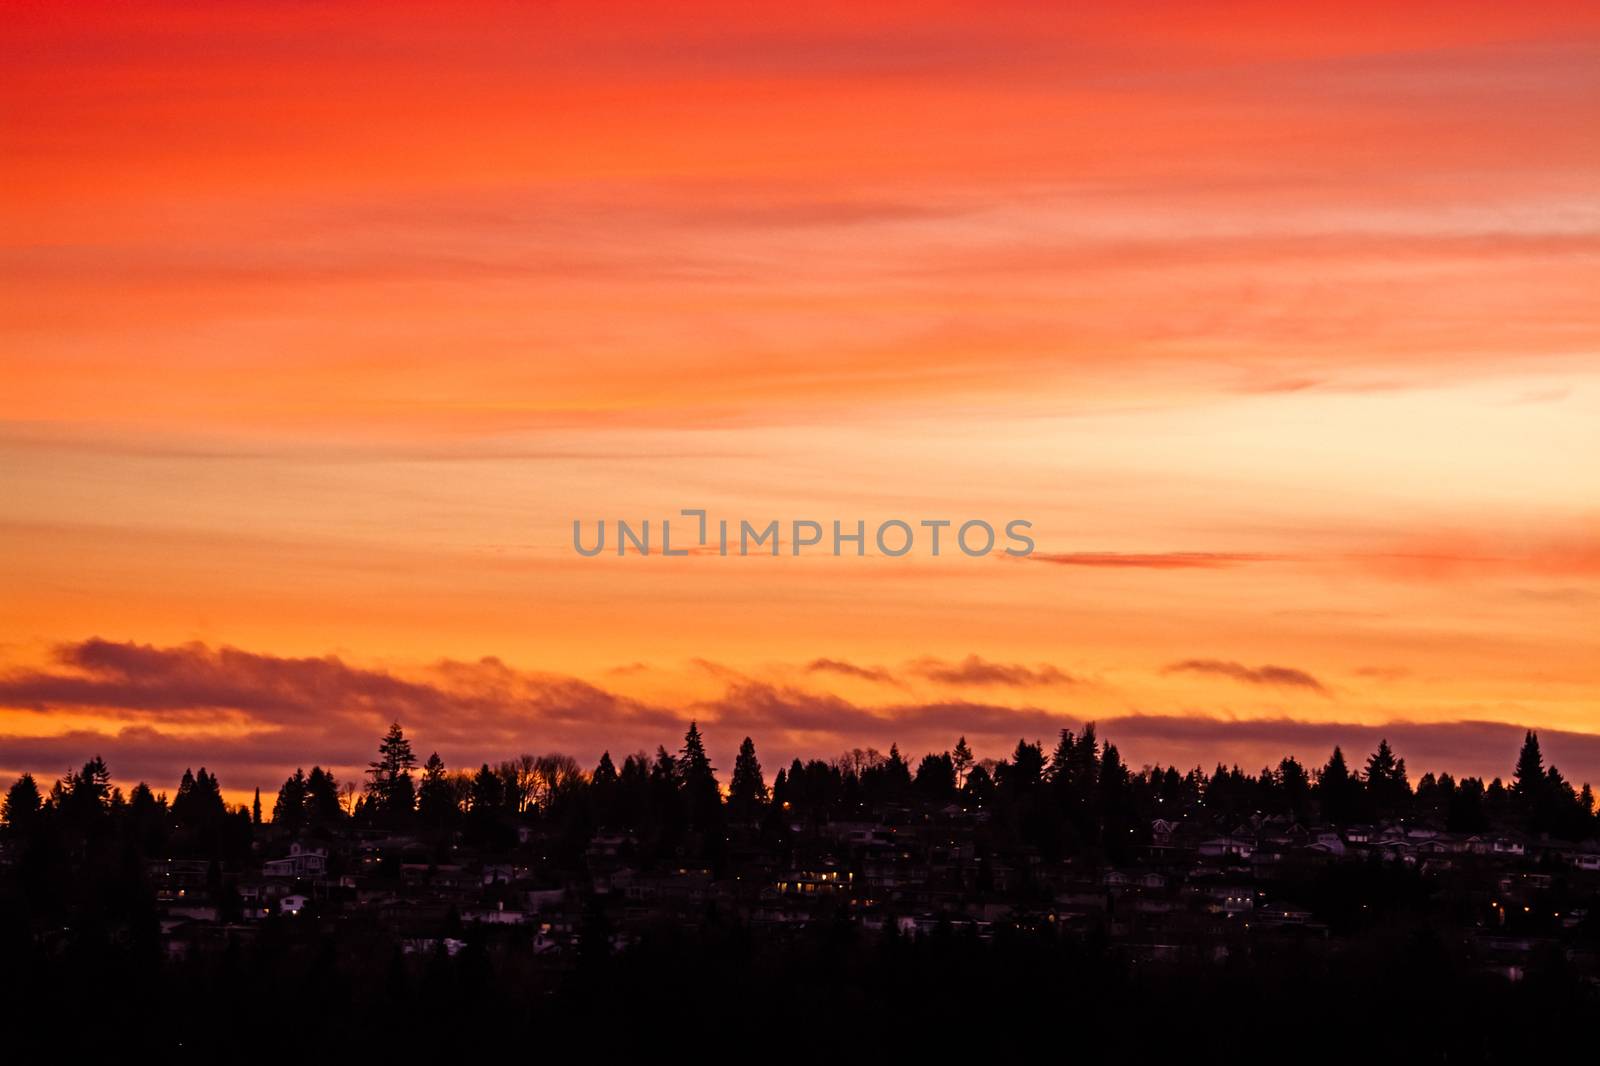 Suburban residential area on sunset sky background by Imagenet